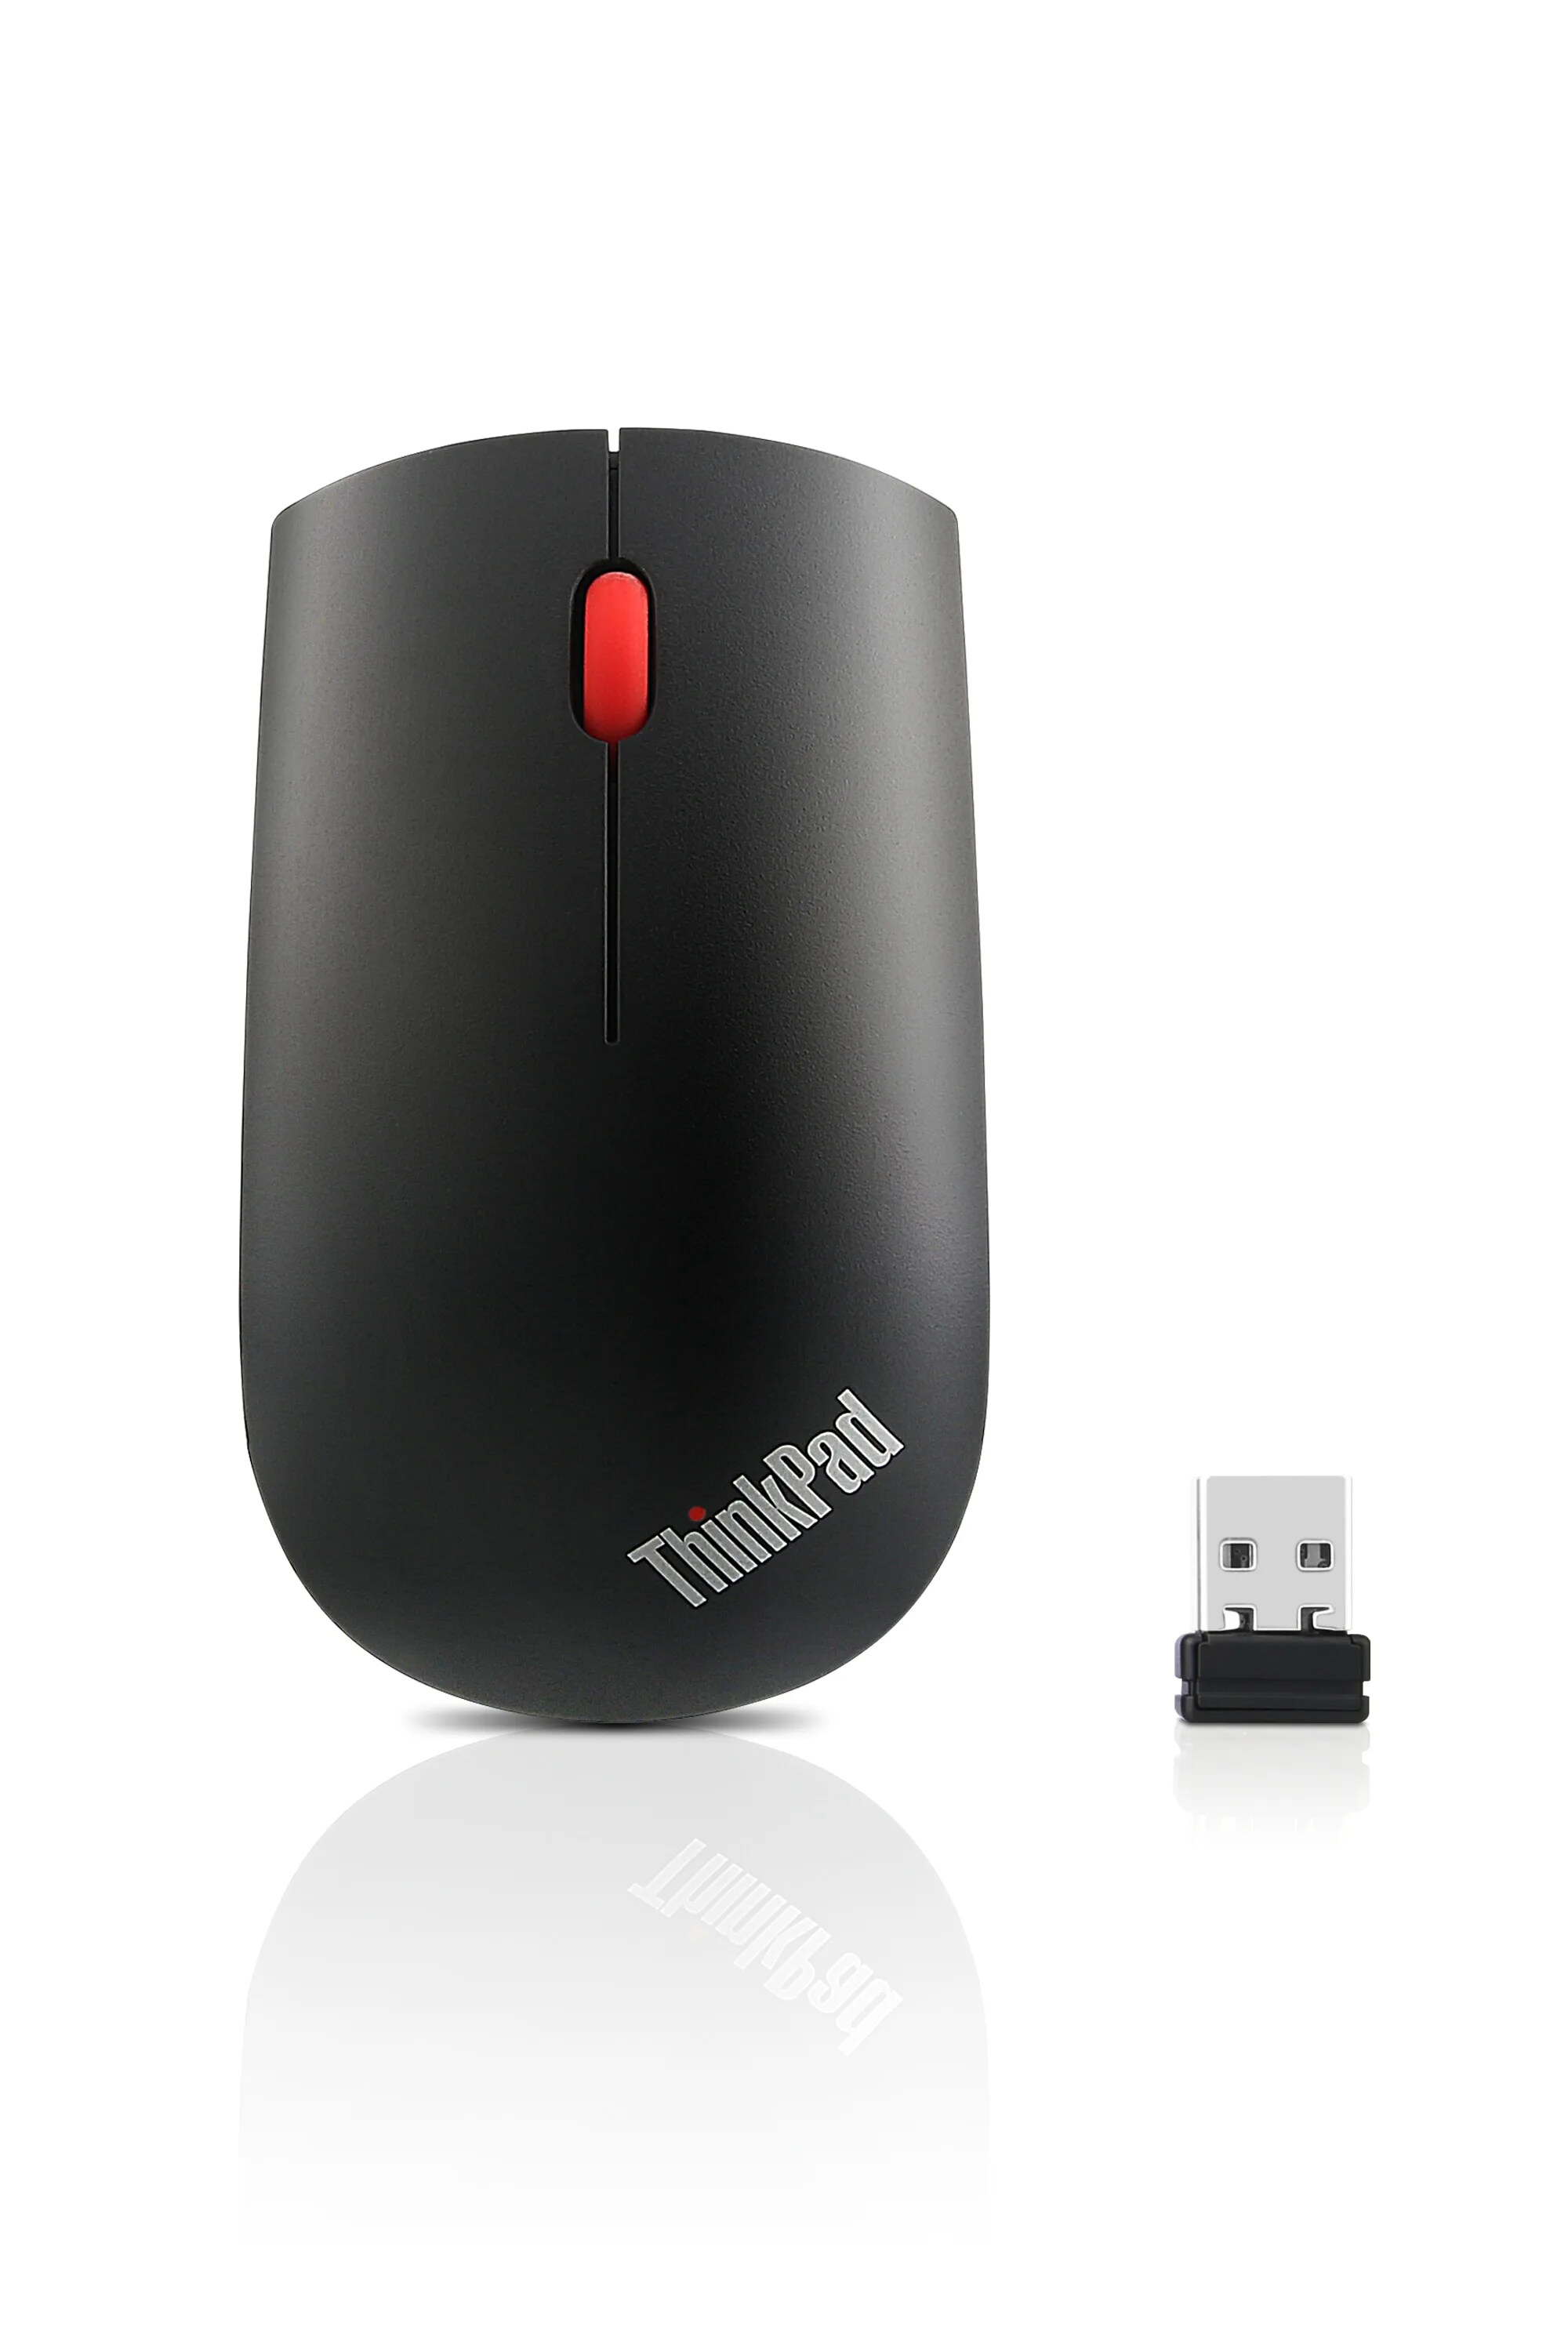 br-thinkpad-mouse-1